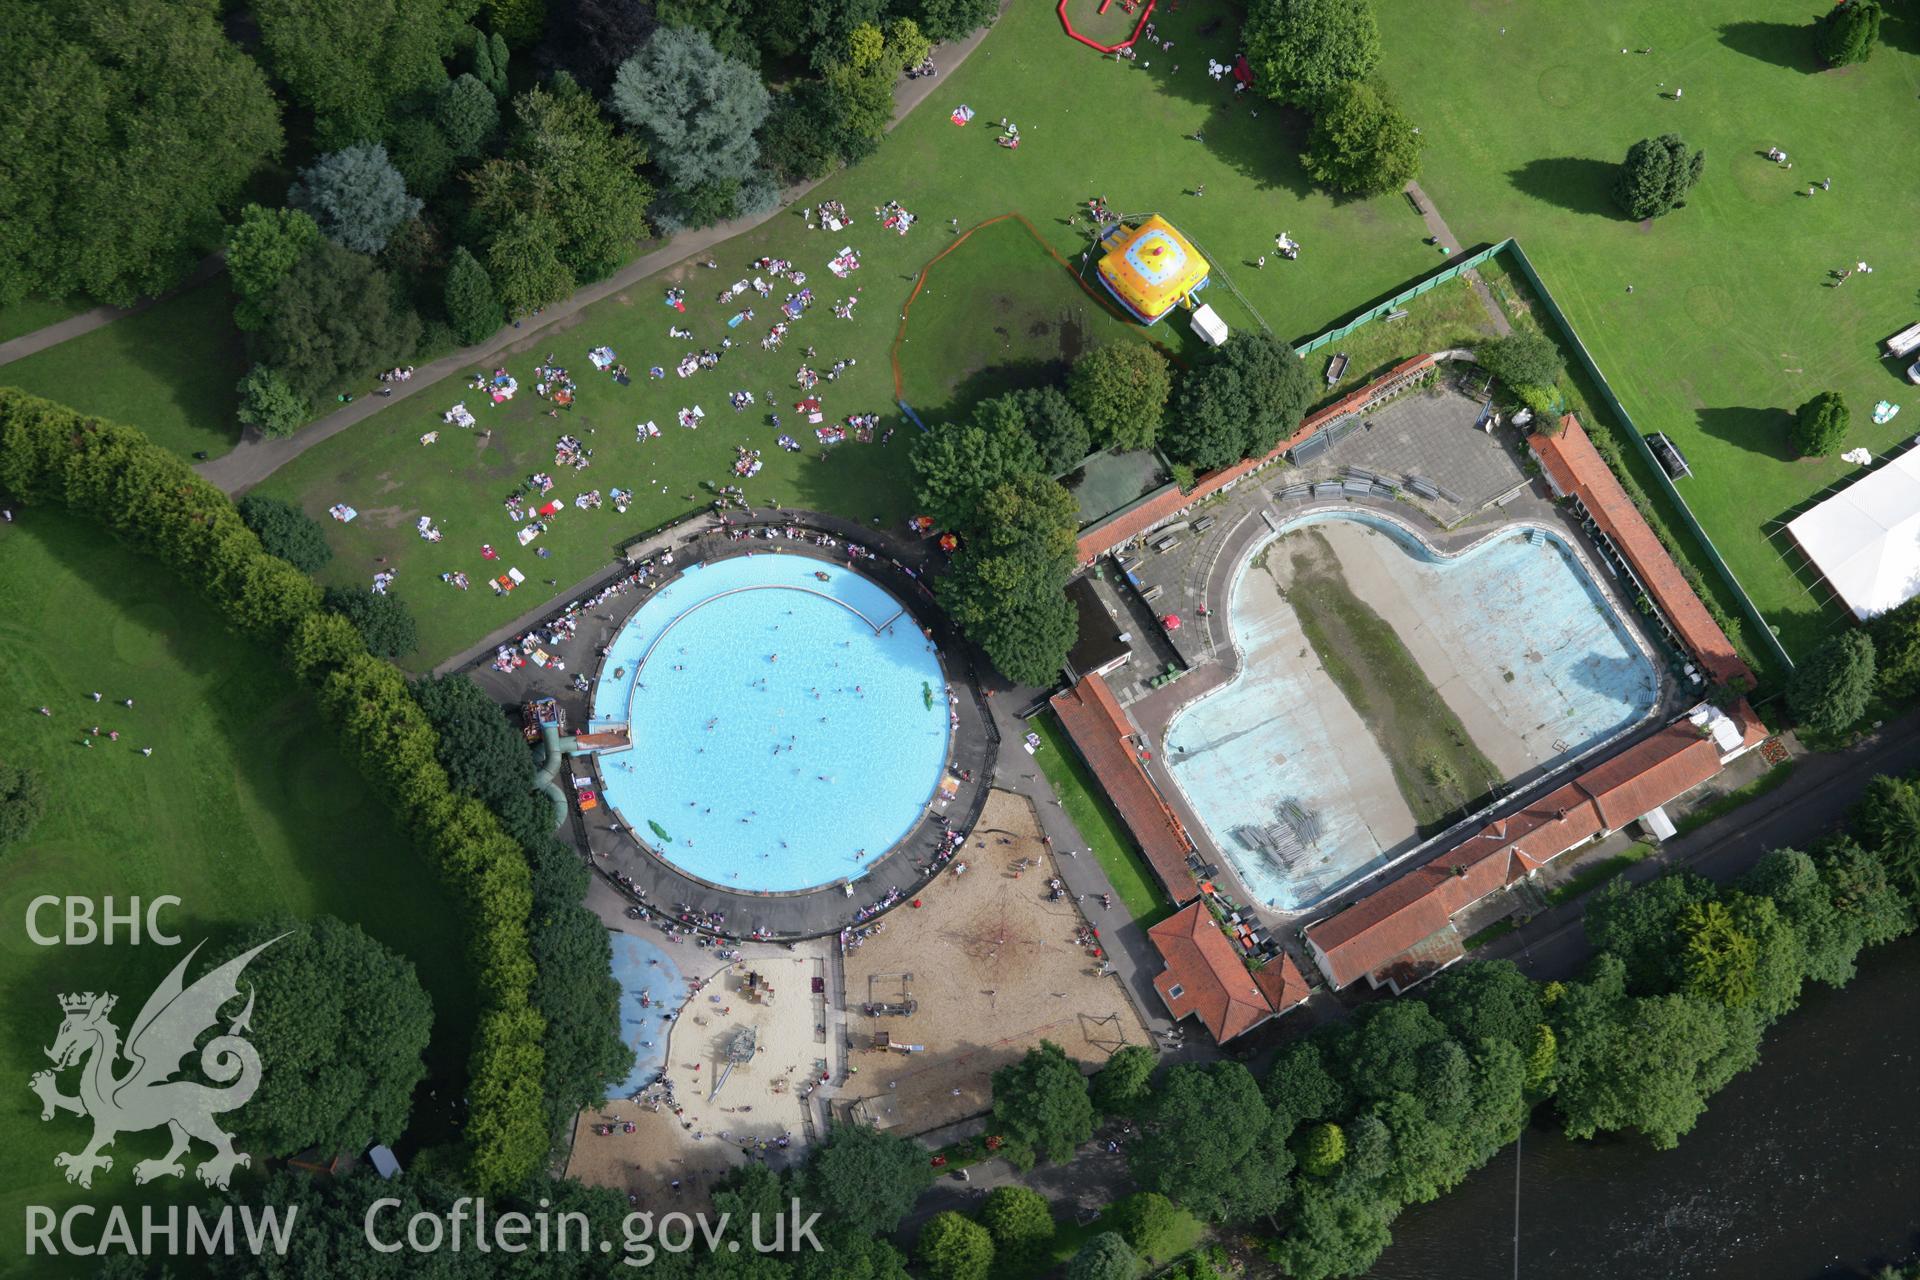 RCAHMW colour oblique aerial photograph of Ynysangharad Park, Pontypridd, showing the lido. Taken on 30 July 2007 by Toby Driver